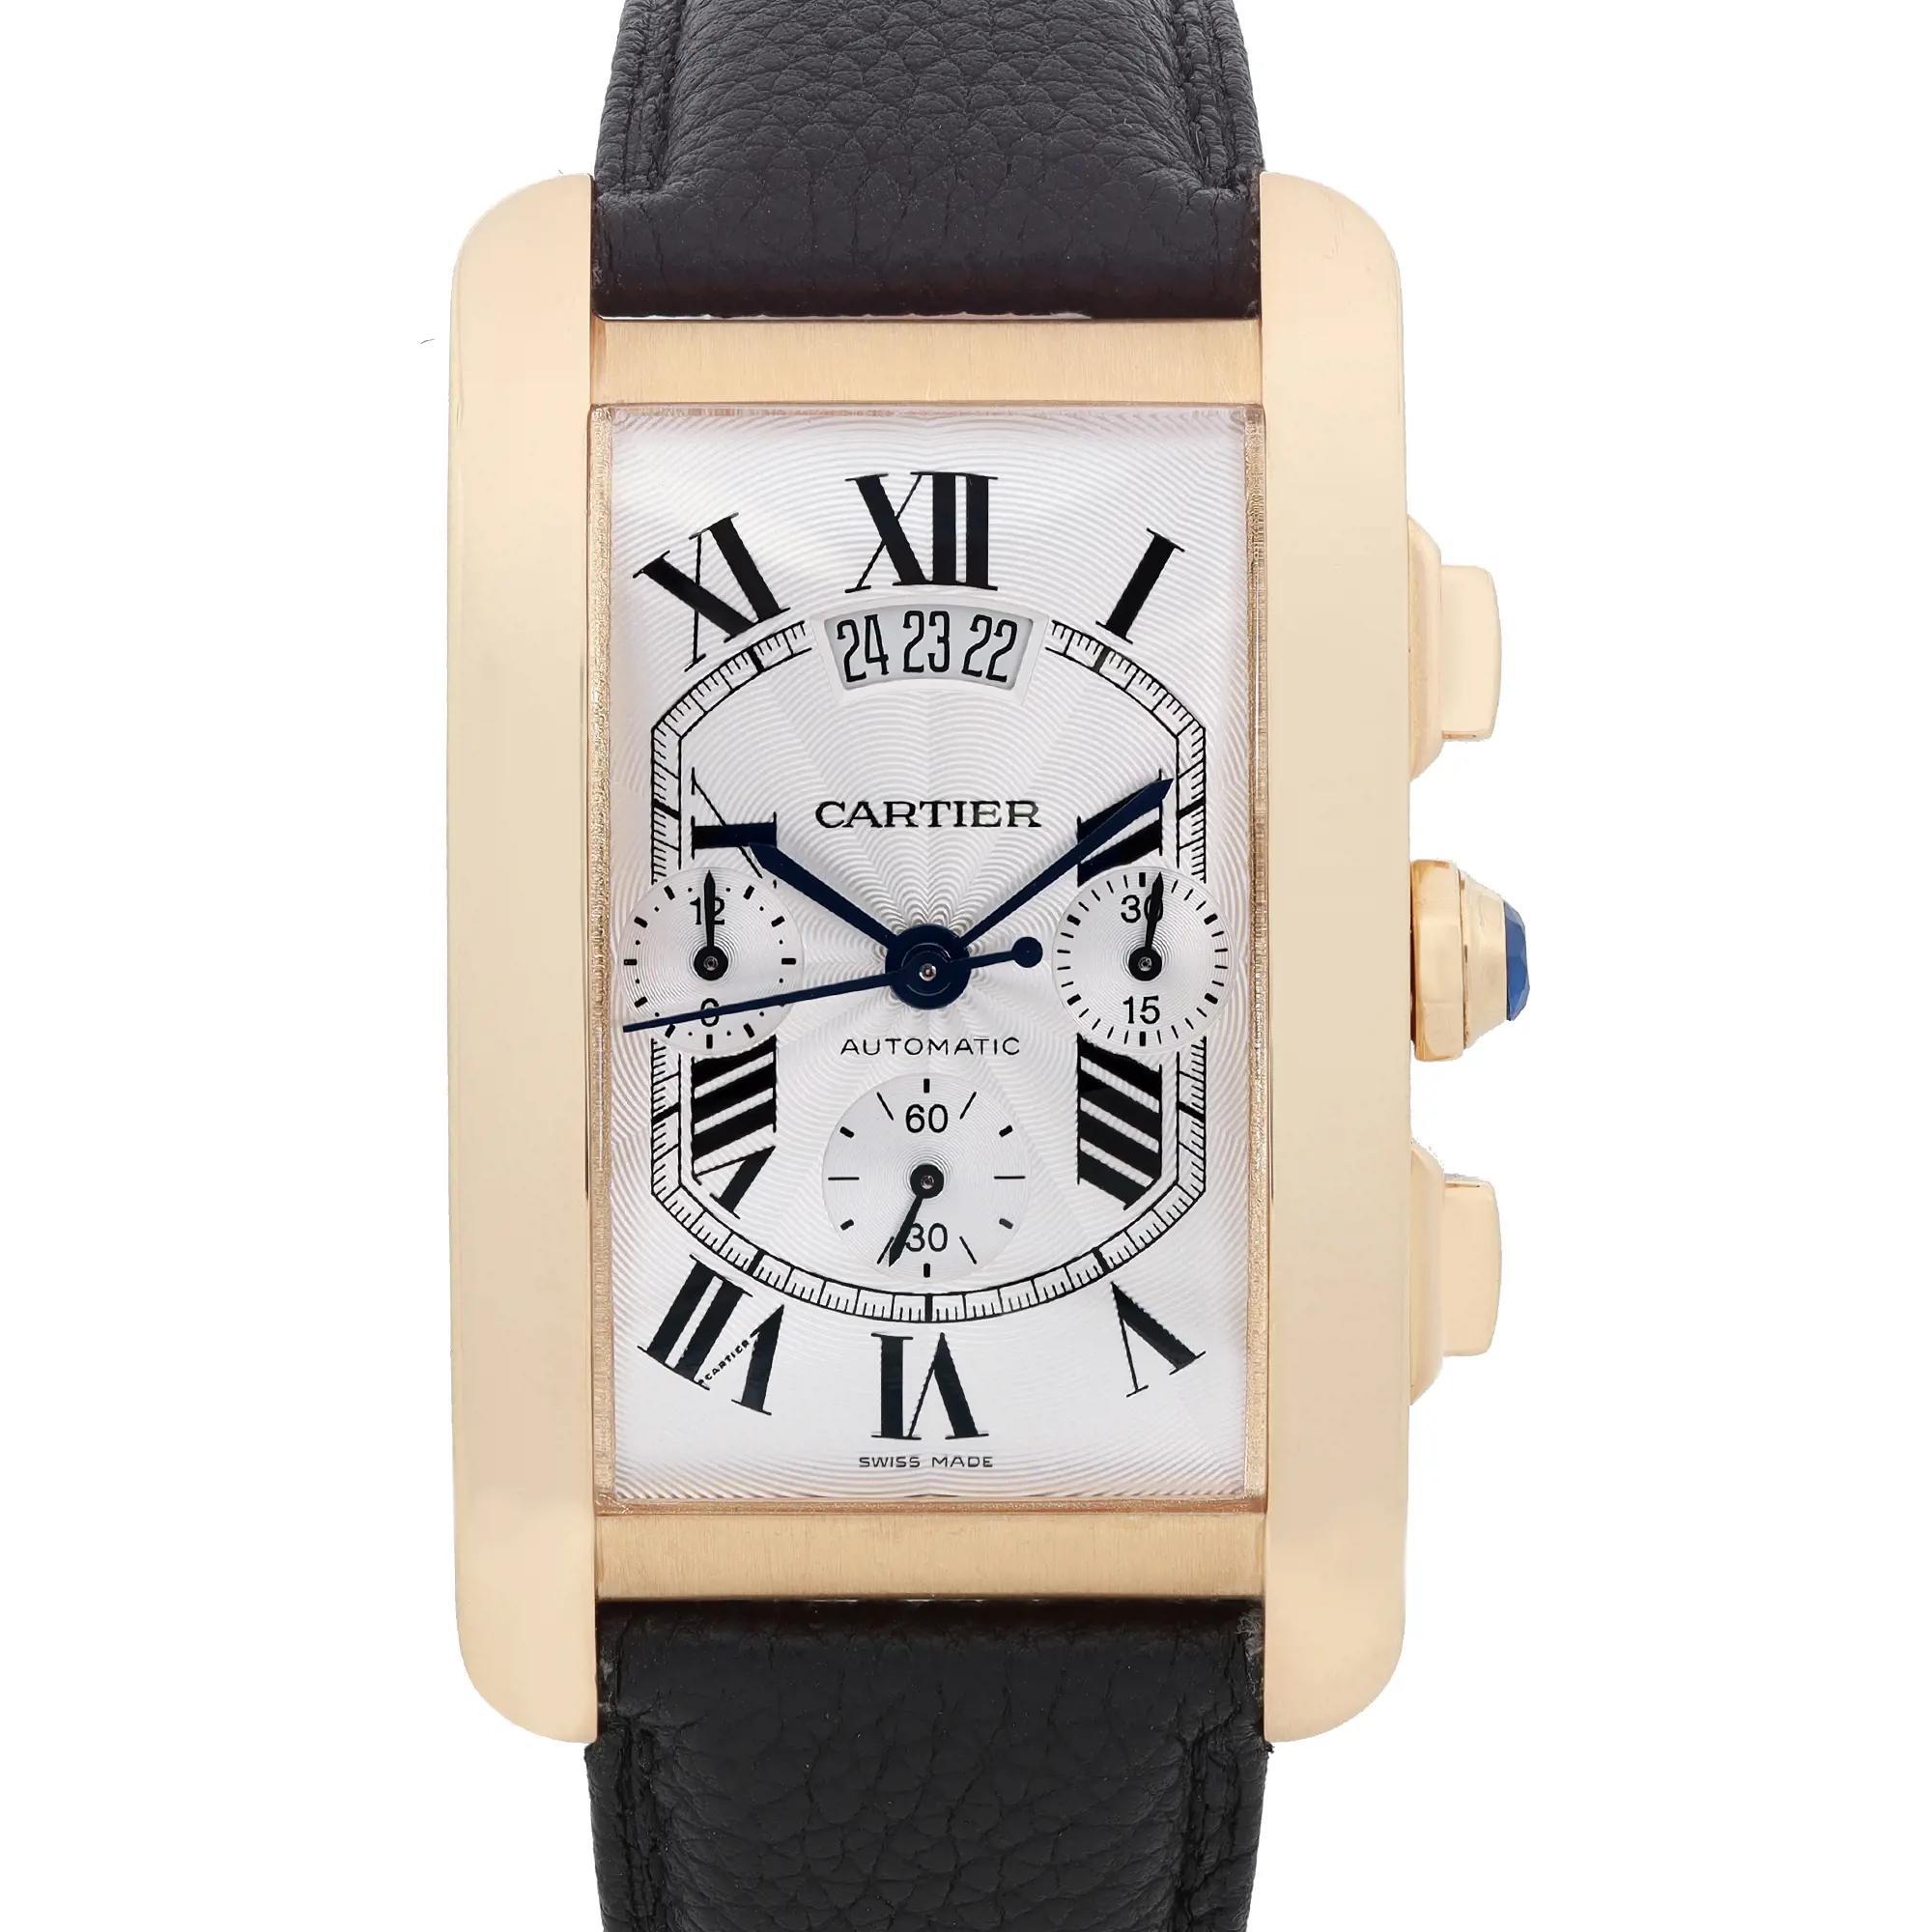 Pre-Owned and in excellent condition. No original box and papers are included.

Brand: Cartier  Type: Wristwatch  Department: Men  Model Number: W2609356  Country/Region of Manufacture: Switzerland  Style: Luxury  Model: Cartier Tank Americaine  